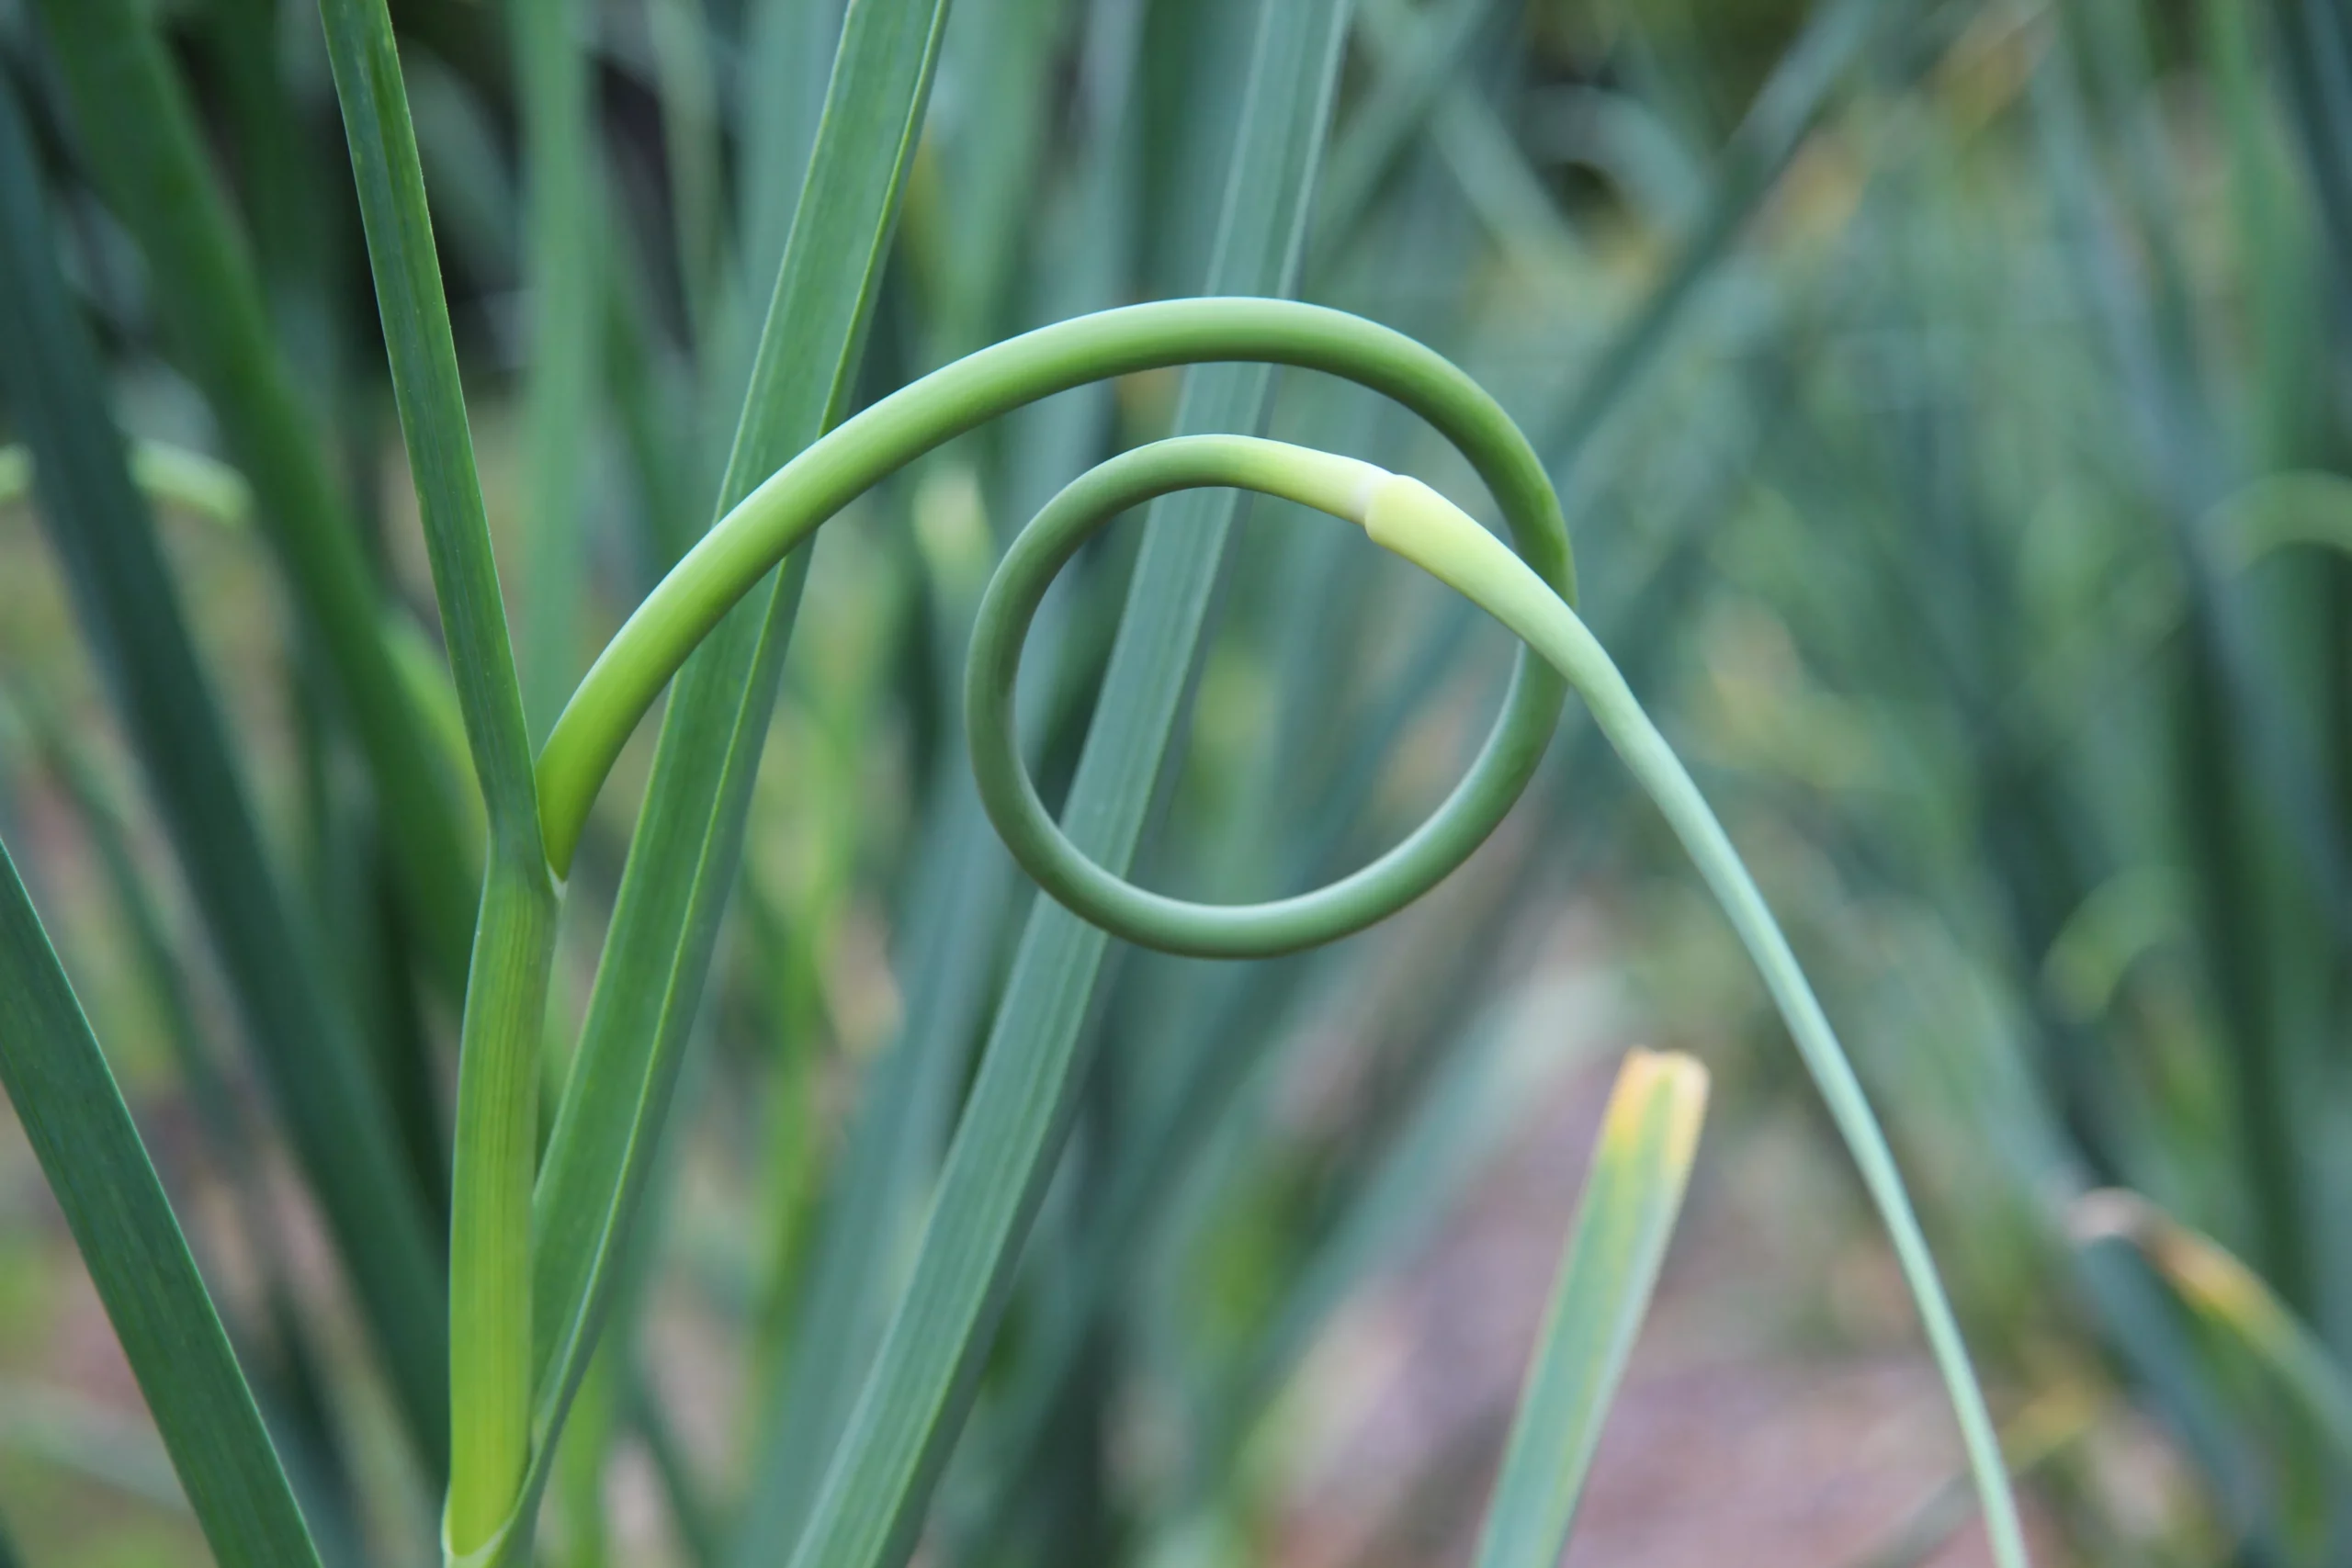 Featured image for “Garlic Scape”